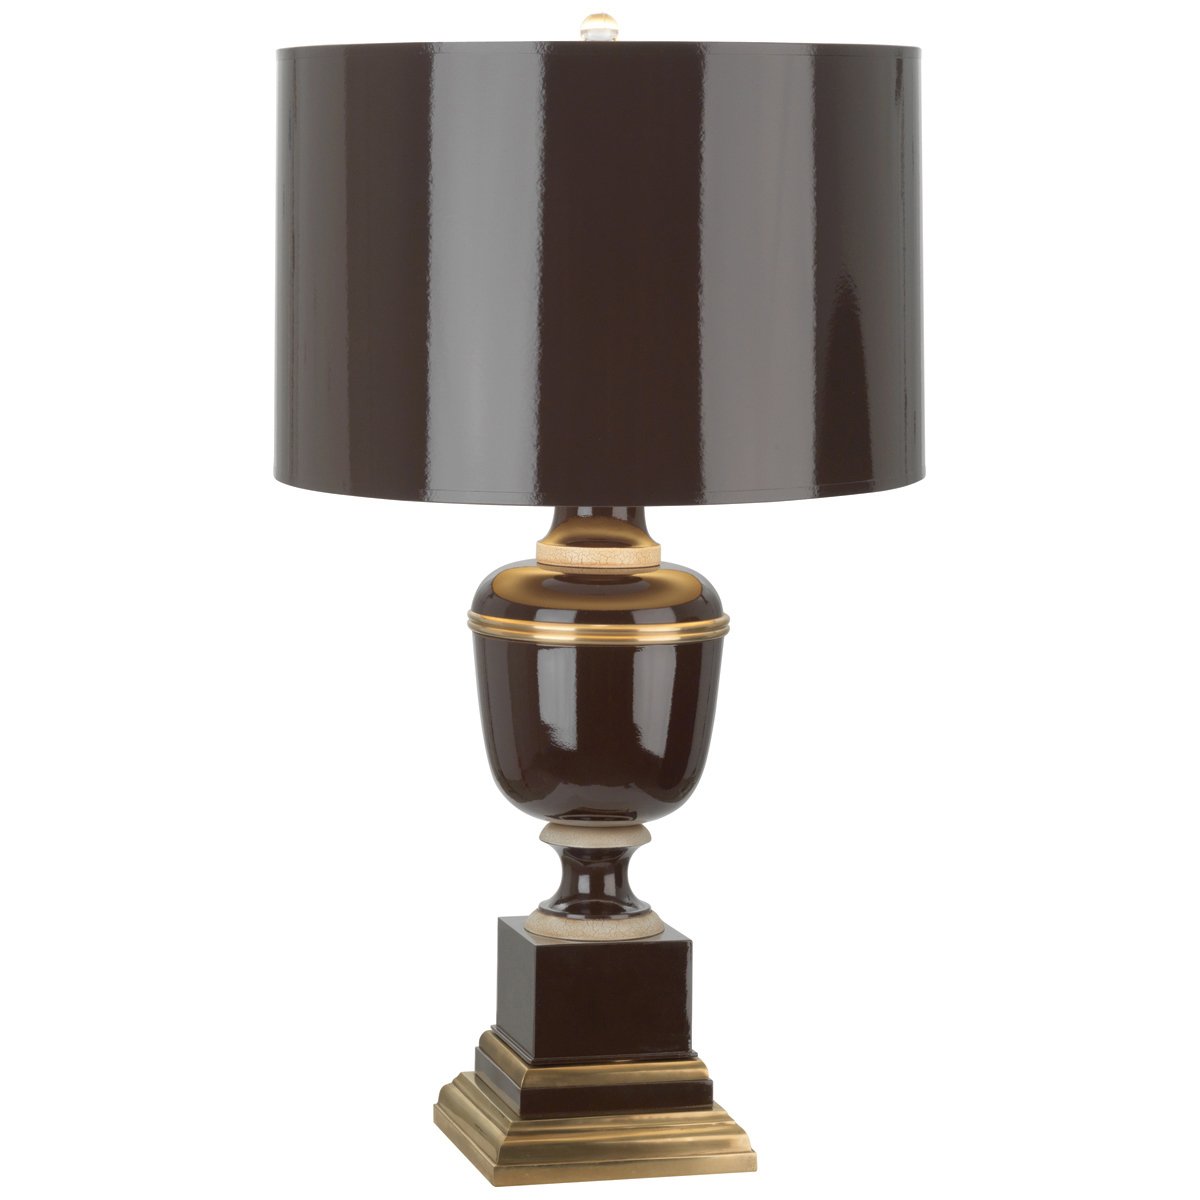 Annika Table Lamp in Chocolate Lacquered Paint w Natural Brass and Painted Paper Shade design by Robert Abbey